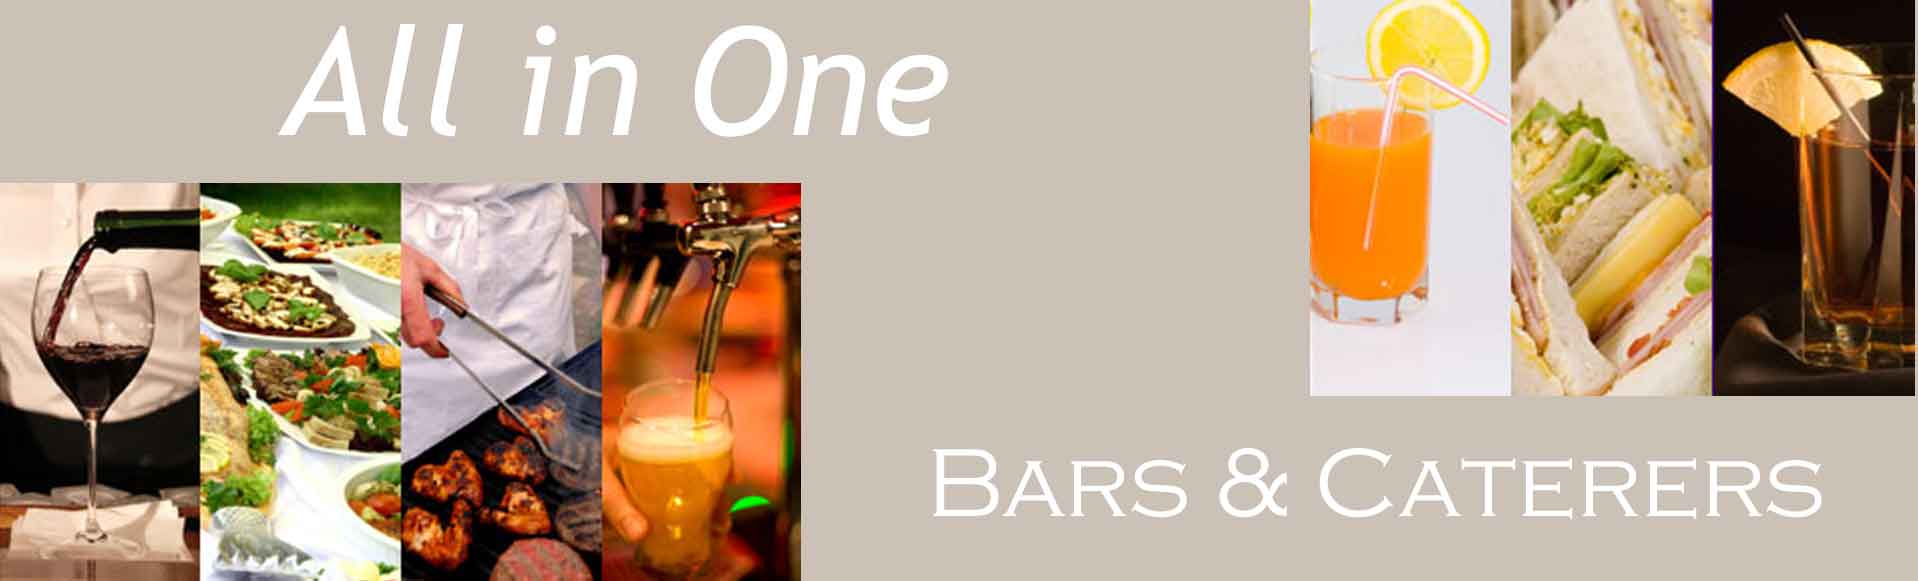 All in One Bars and Caterers logo